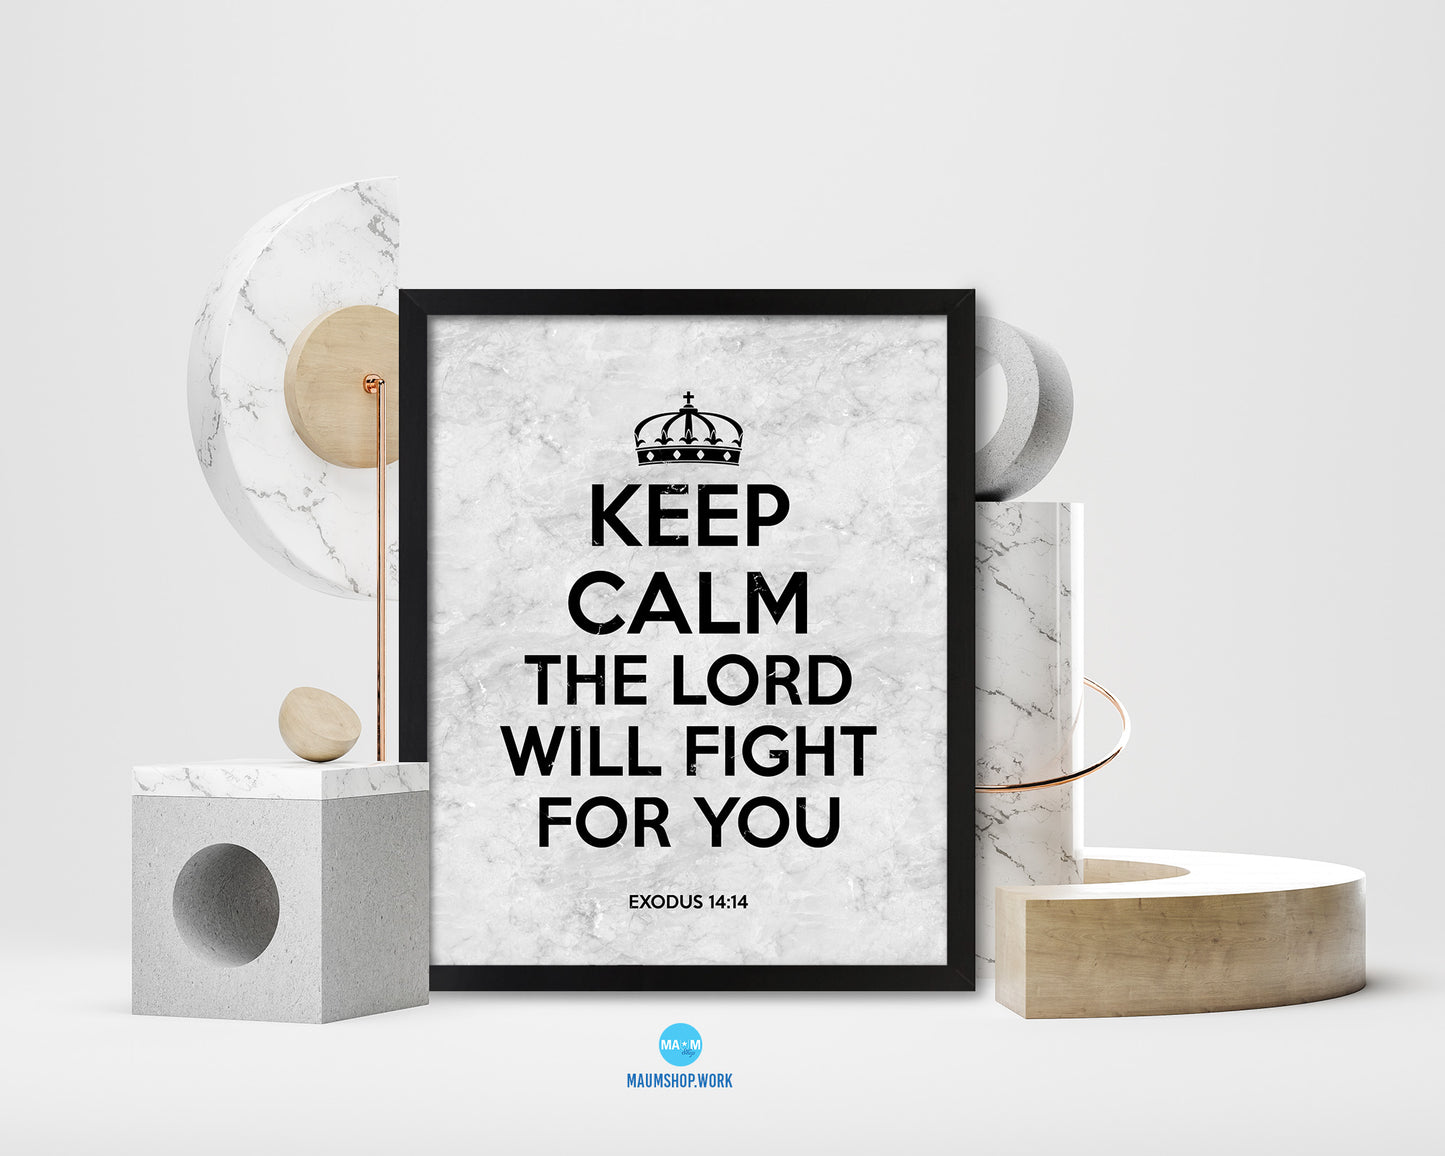 Keep calm the lord will fight for you, Exodus 14:14 Bible Scripture Verse Framed Art